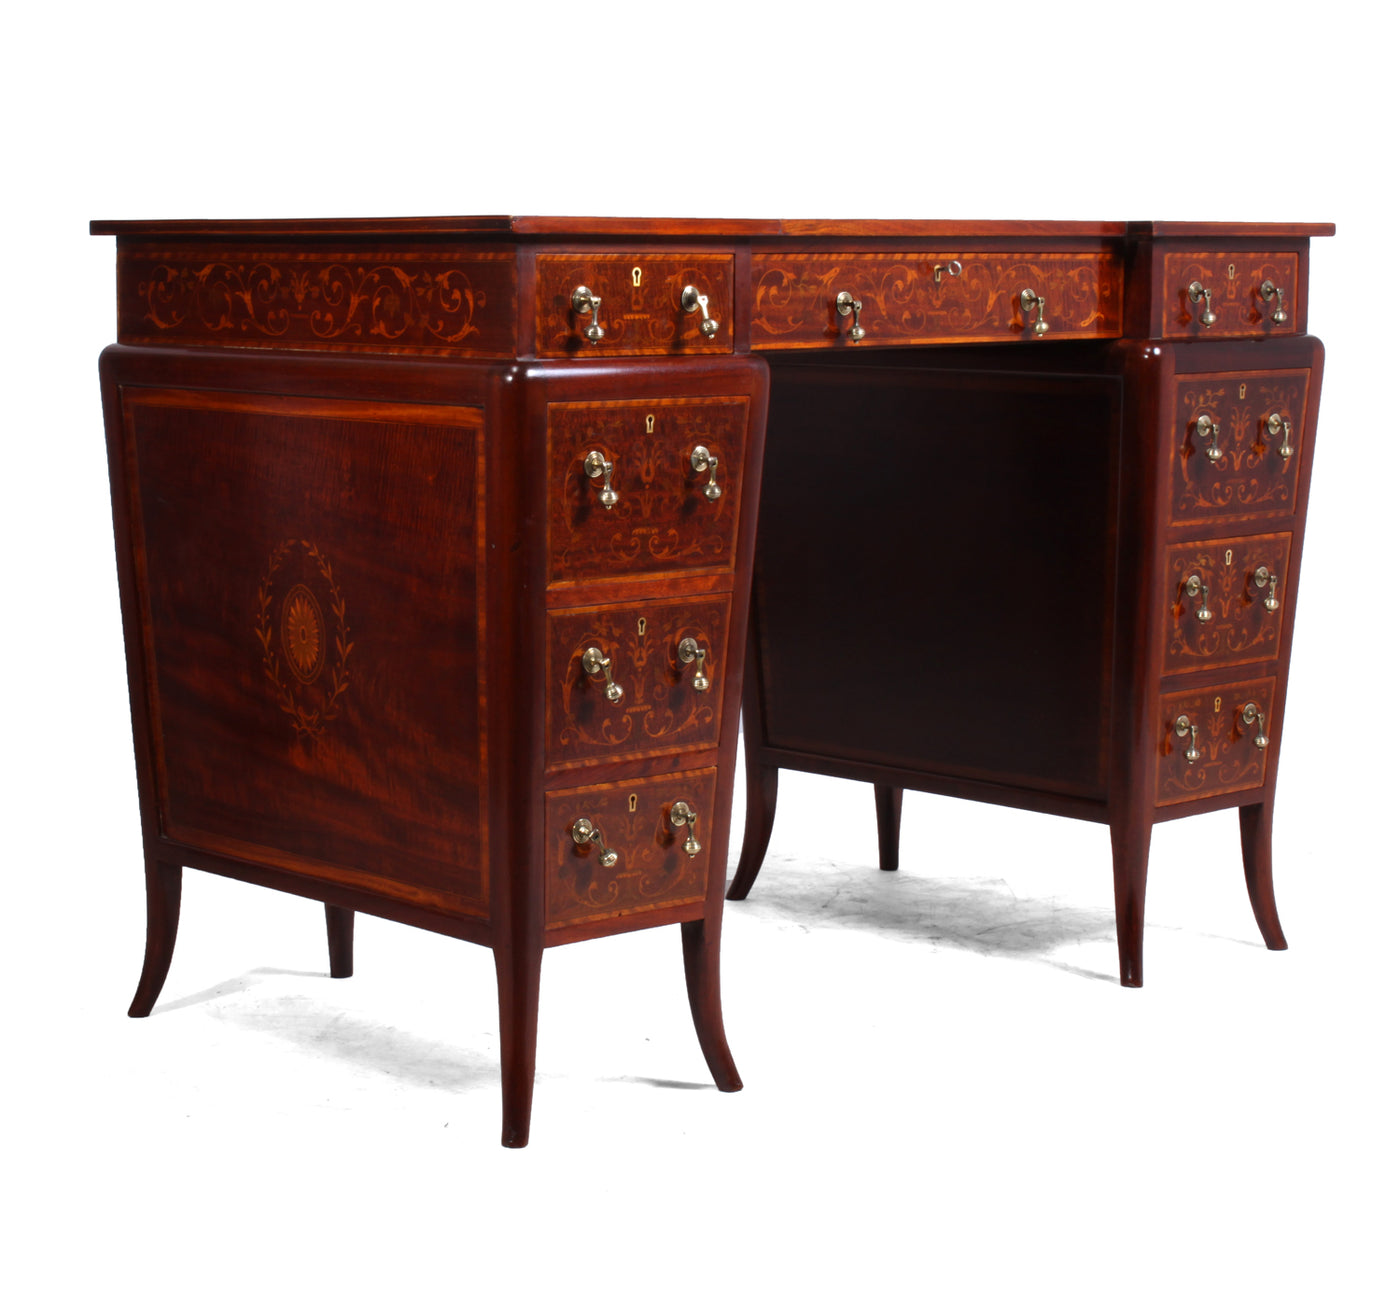 Antique Writing Desk by Edwards and Roberts